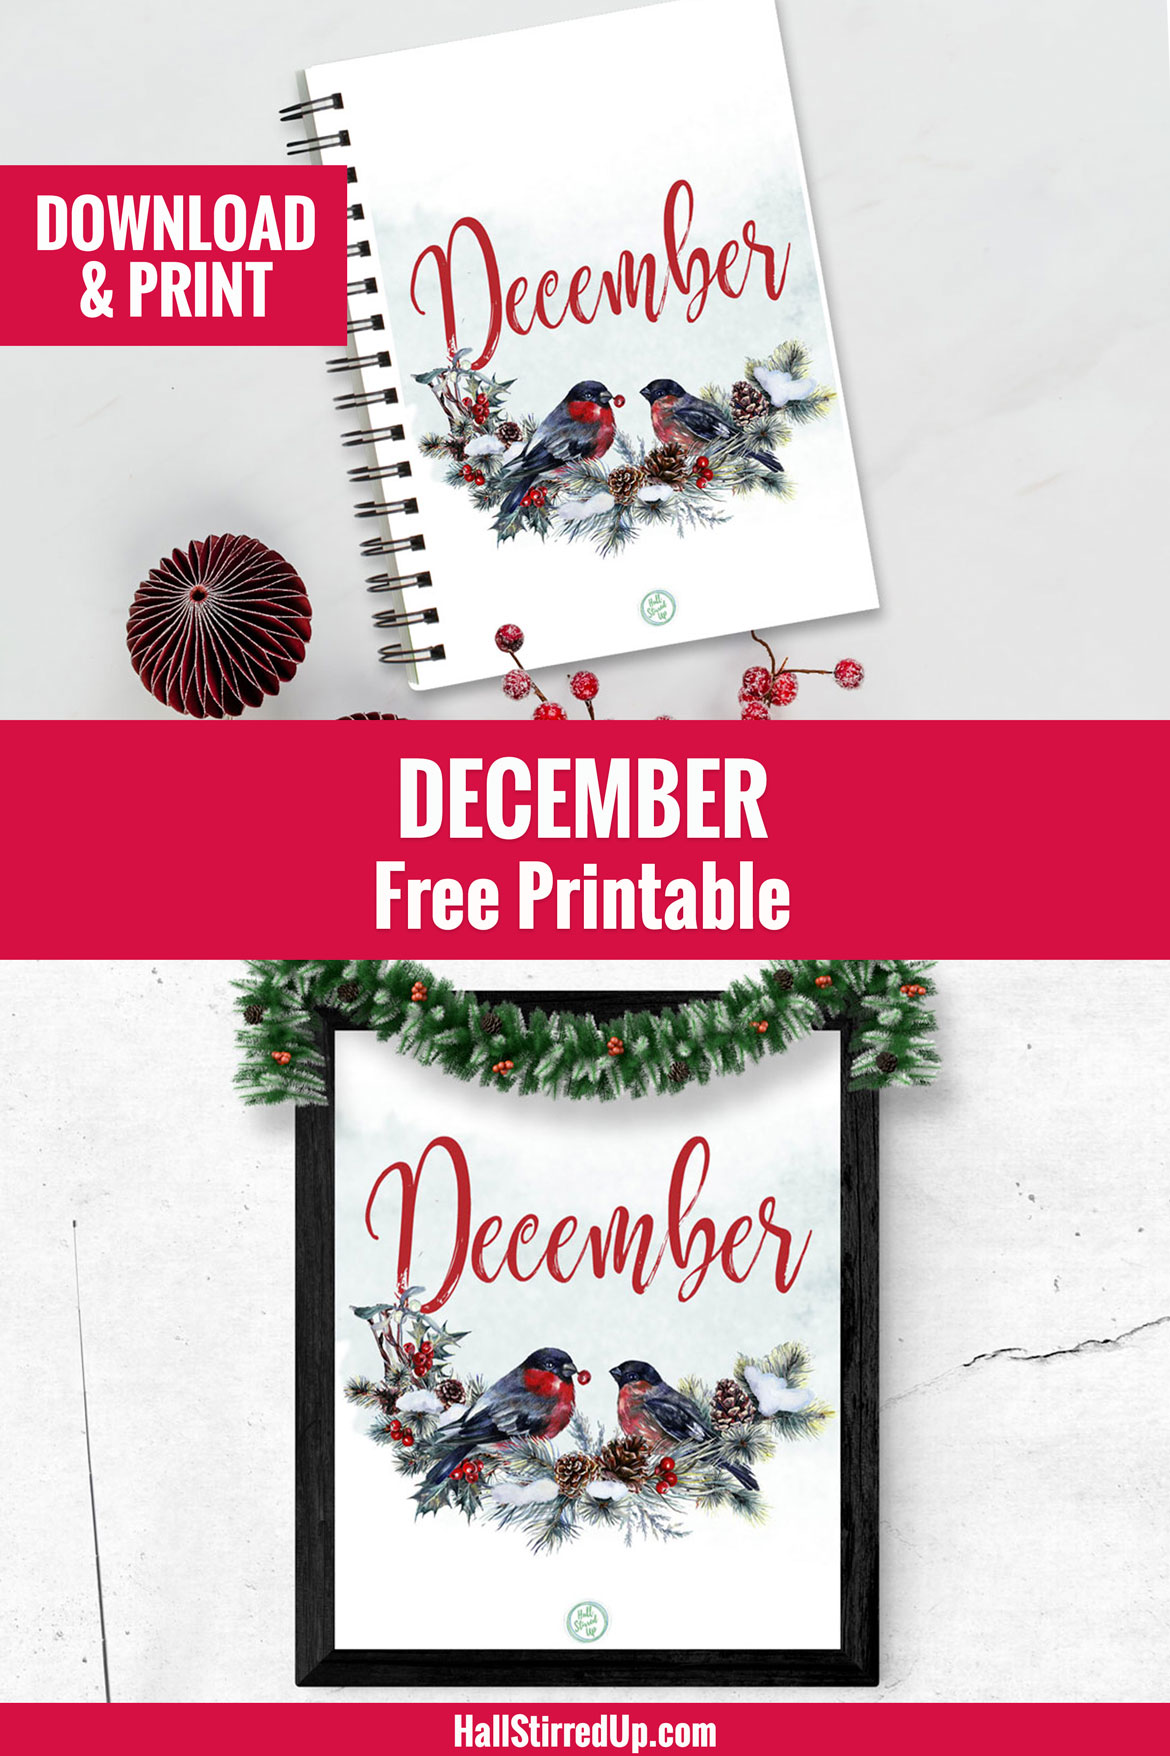 December is here with a pretty free printablee